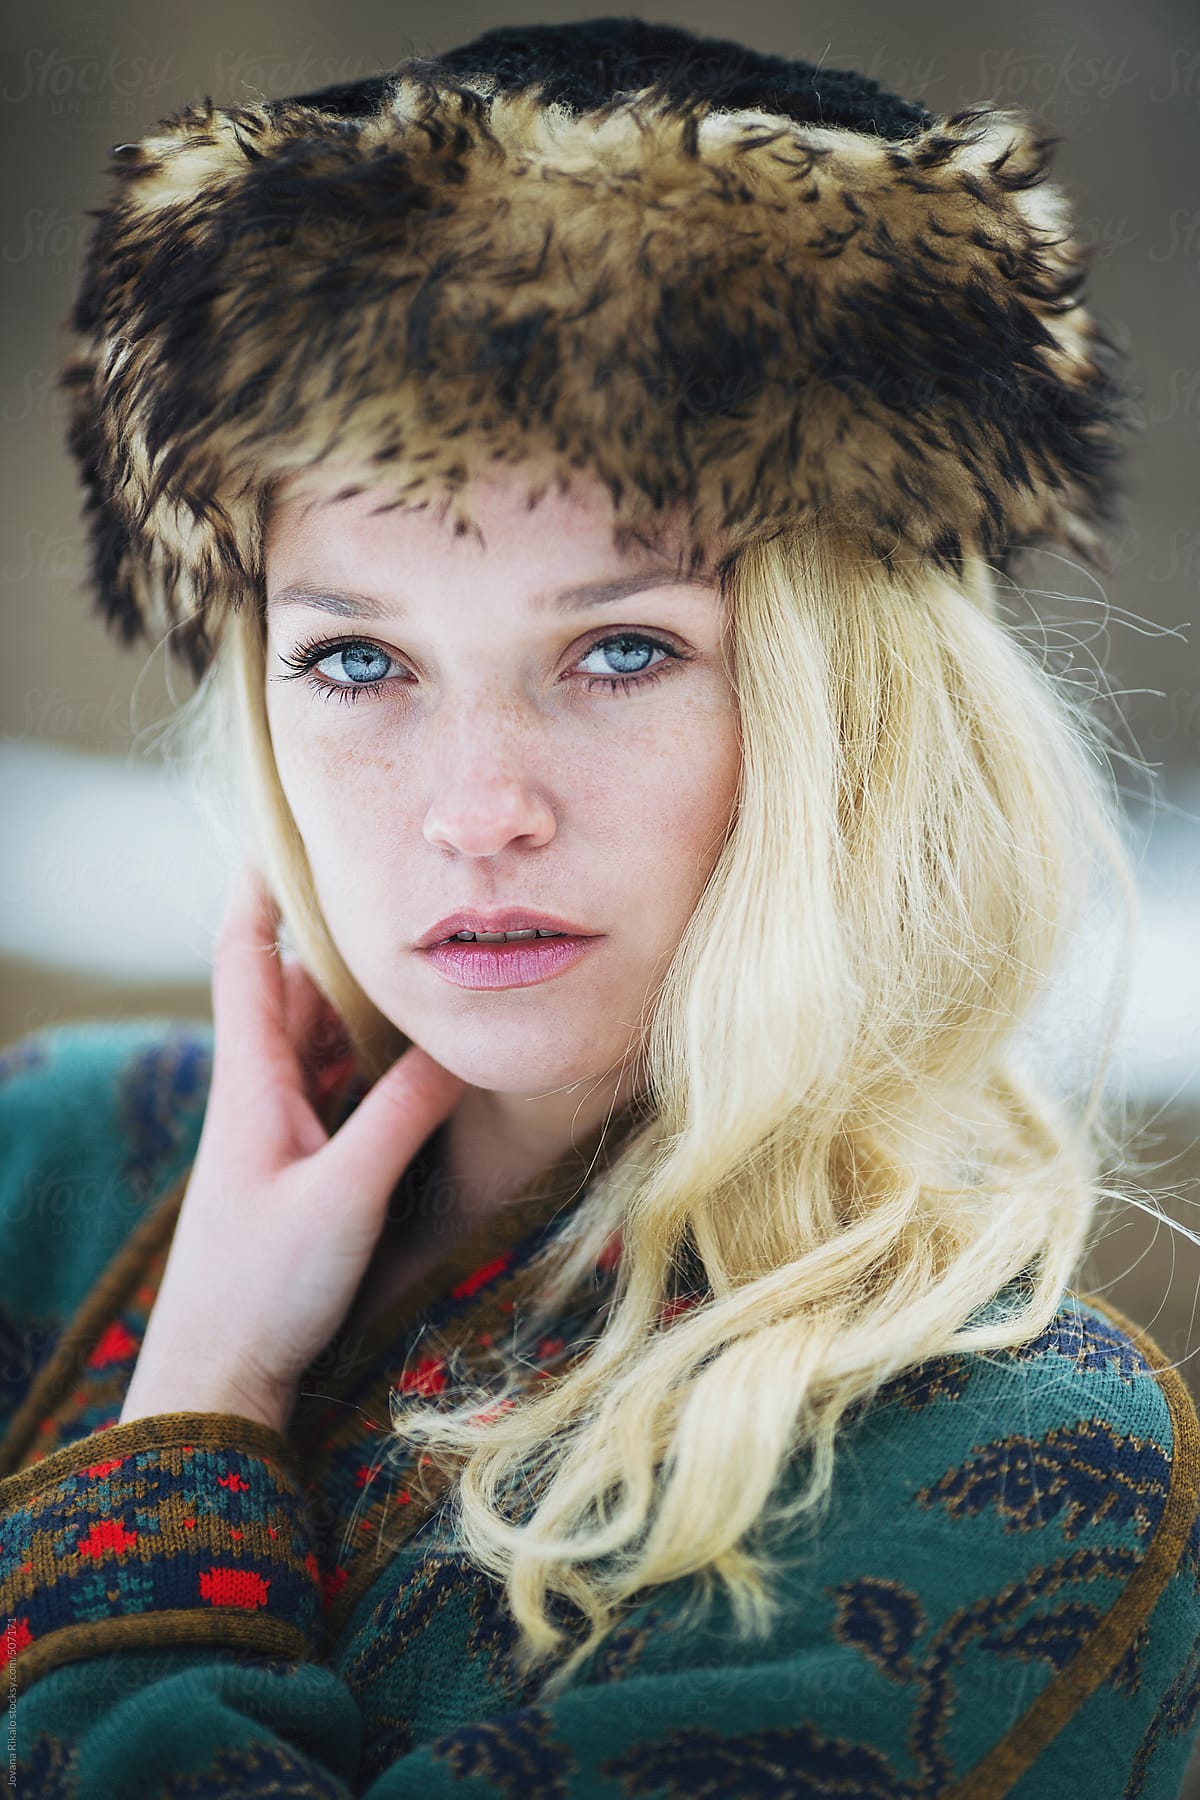 Portrait Of A Beautiful Woman With Freckles And Blue Eyes By Stocksy Contributor Jovana